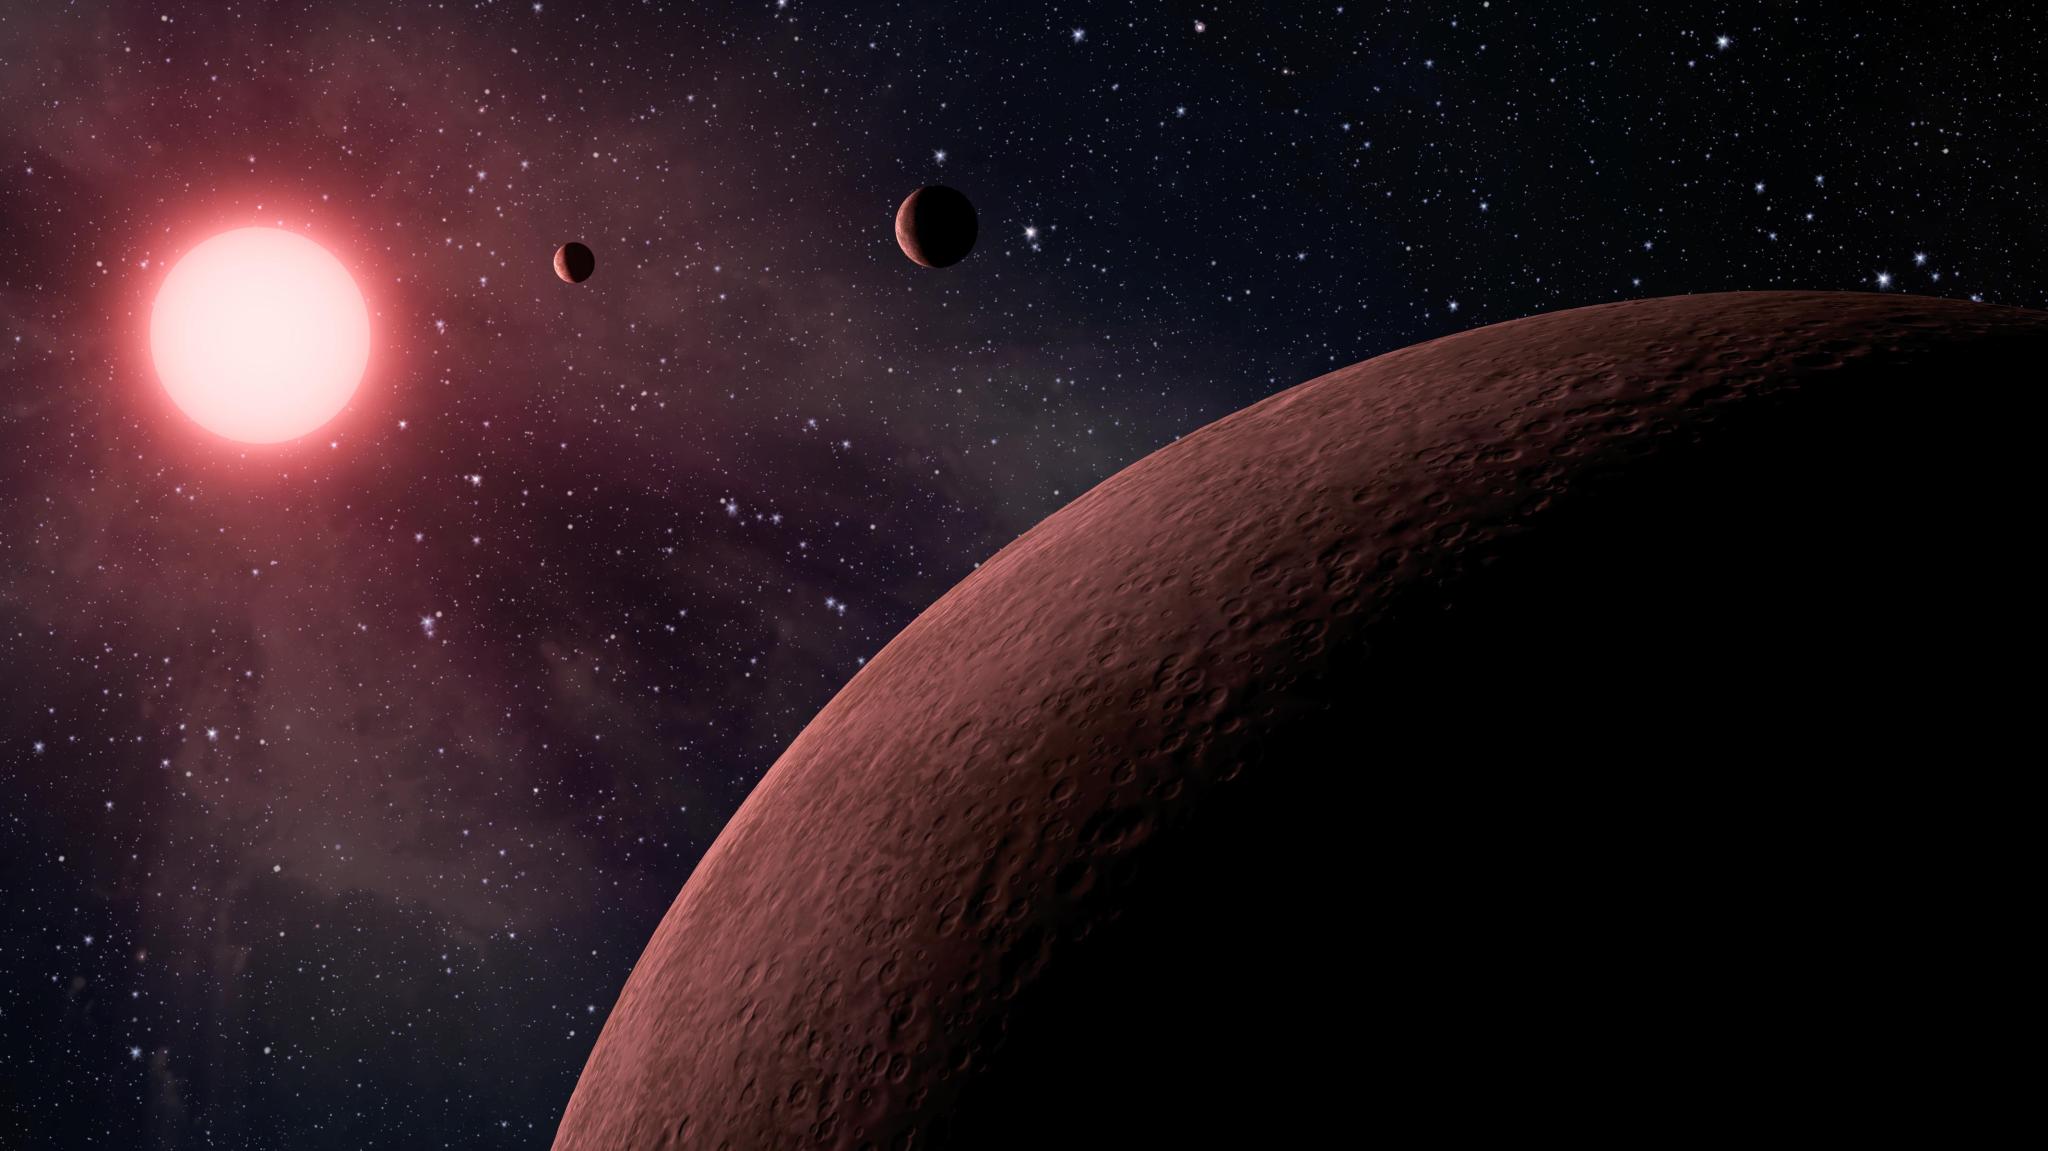 NASA’s Kepler space telescope team has identified 219 new planet candidates, 10 of which are near-Earth size.